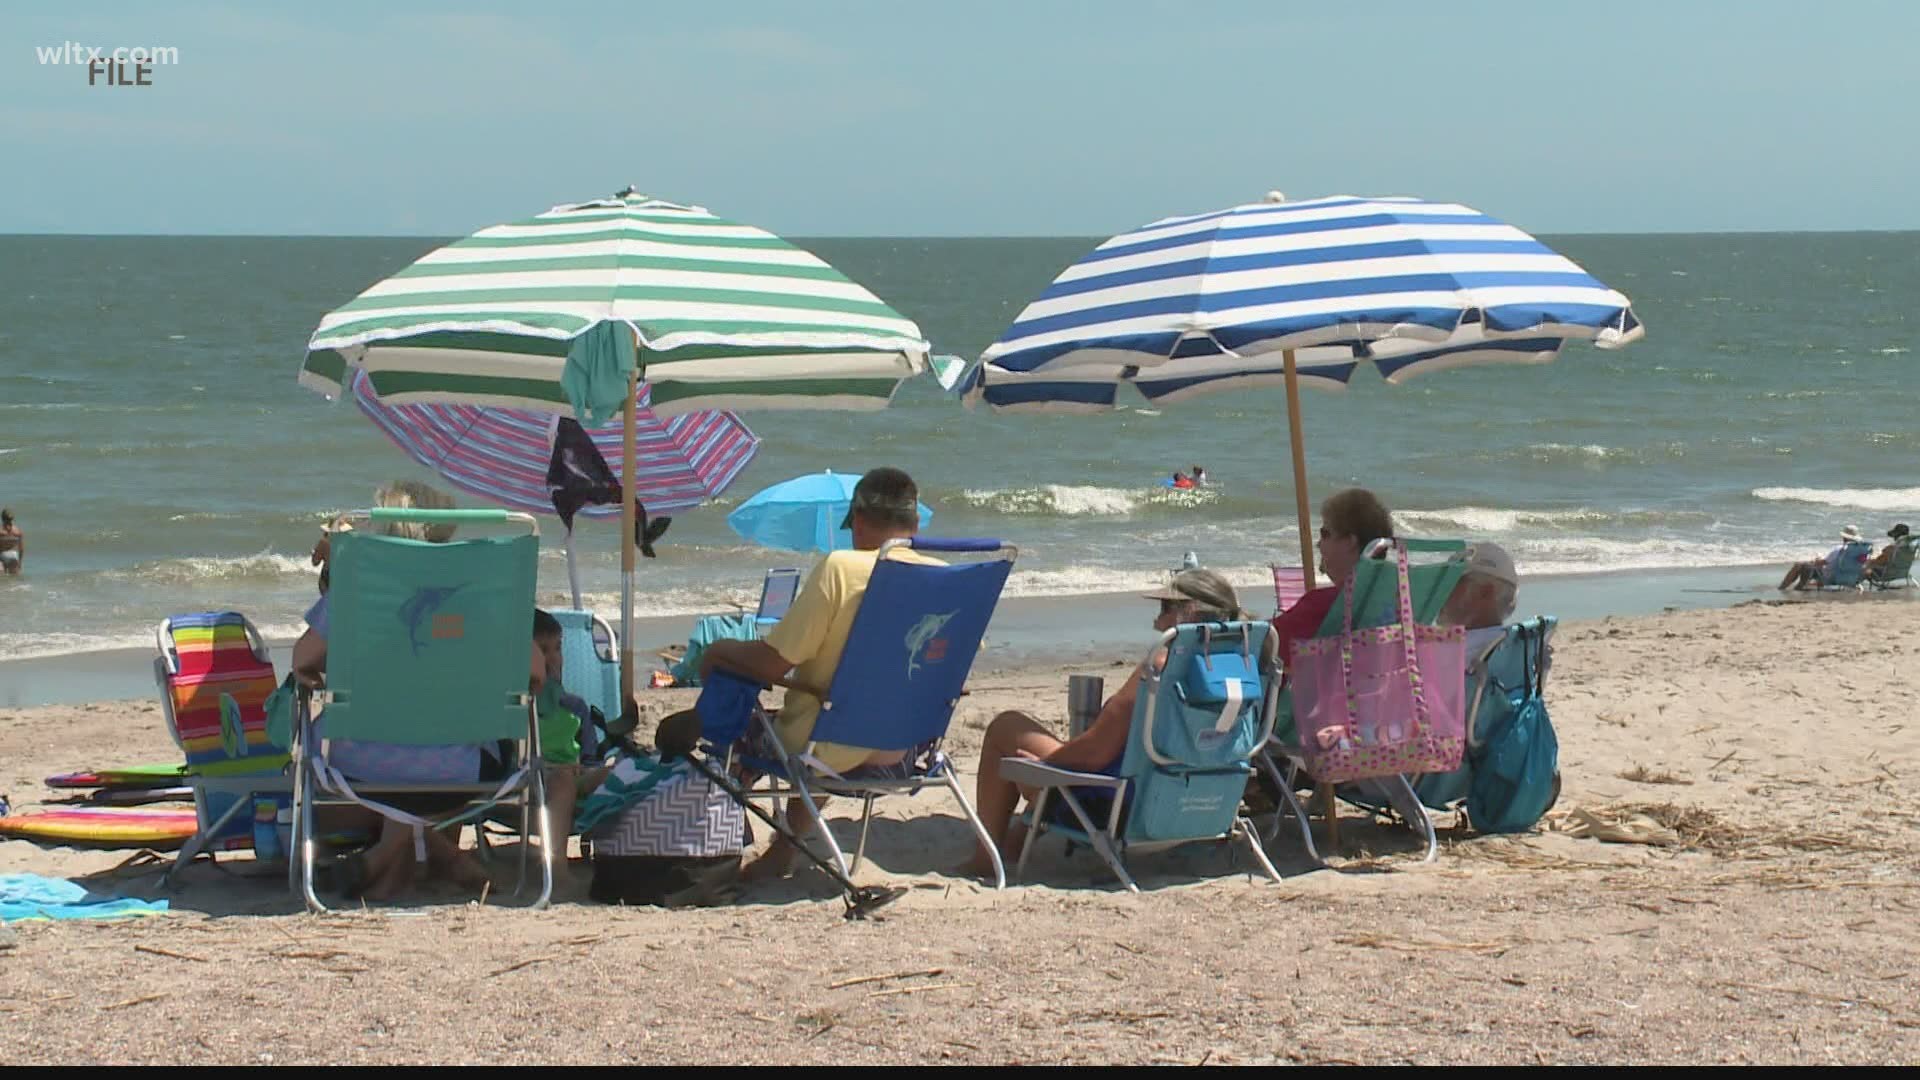 The City of Myrtle Beach on Monday that the city's mask mandate will now be effective through Dec. 31.